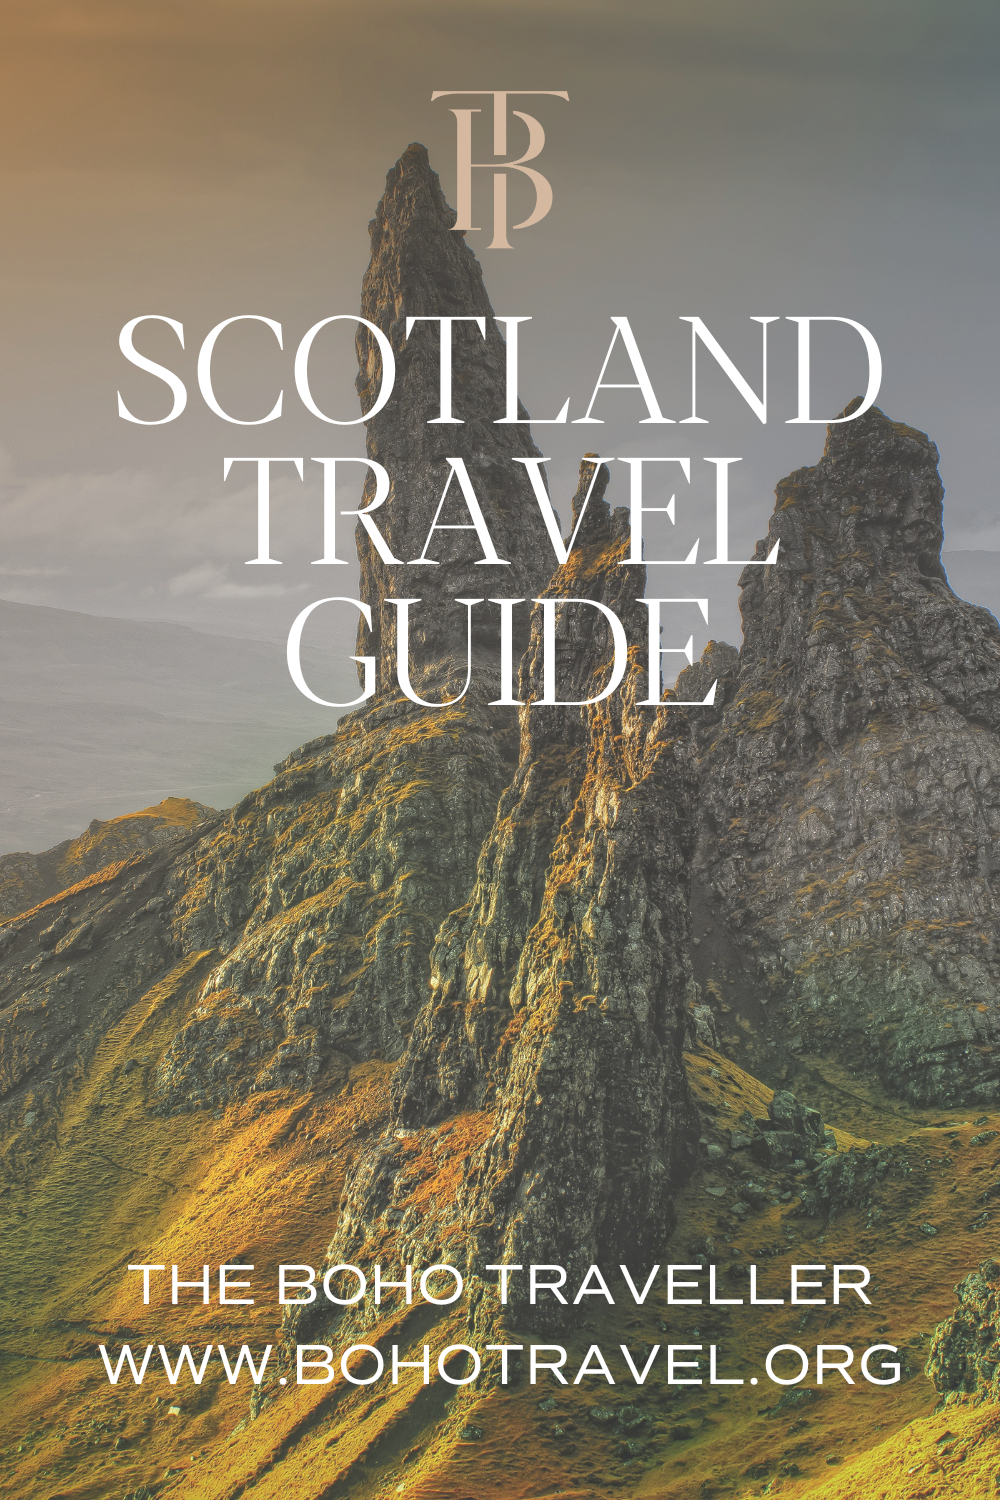 Scotland Travel Guide -- Pack your bags for an unforgettable journey with our Scotland Travel Guide! Discover majestic castles, mystical lochs, and cozy, hidden pubs. Whether you're a history buff, nature lover, or adventure seeker, Scotland calls you to explore its stunning landscapes and rich heritage. #scotland #scotlandtravelguide